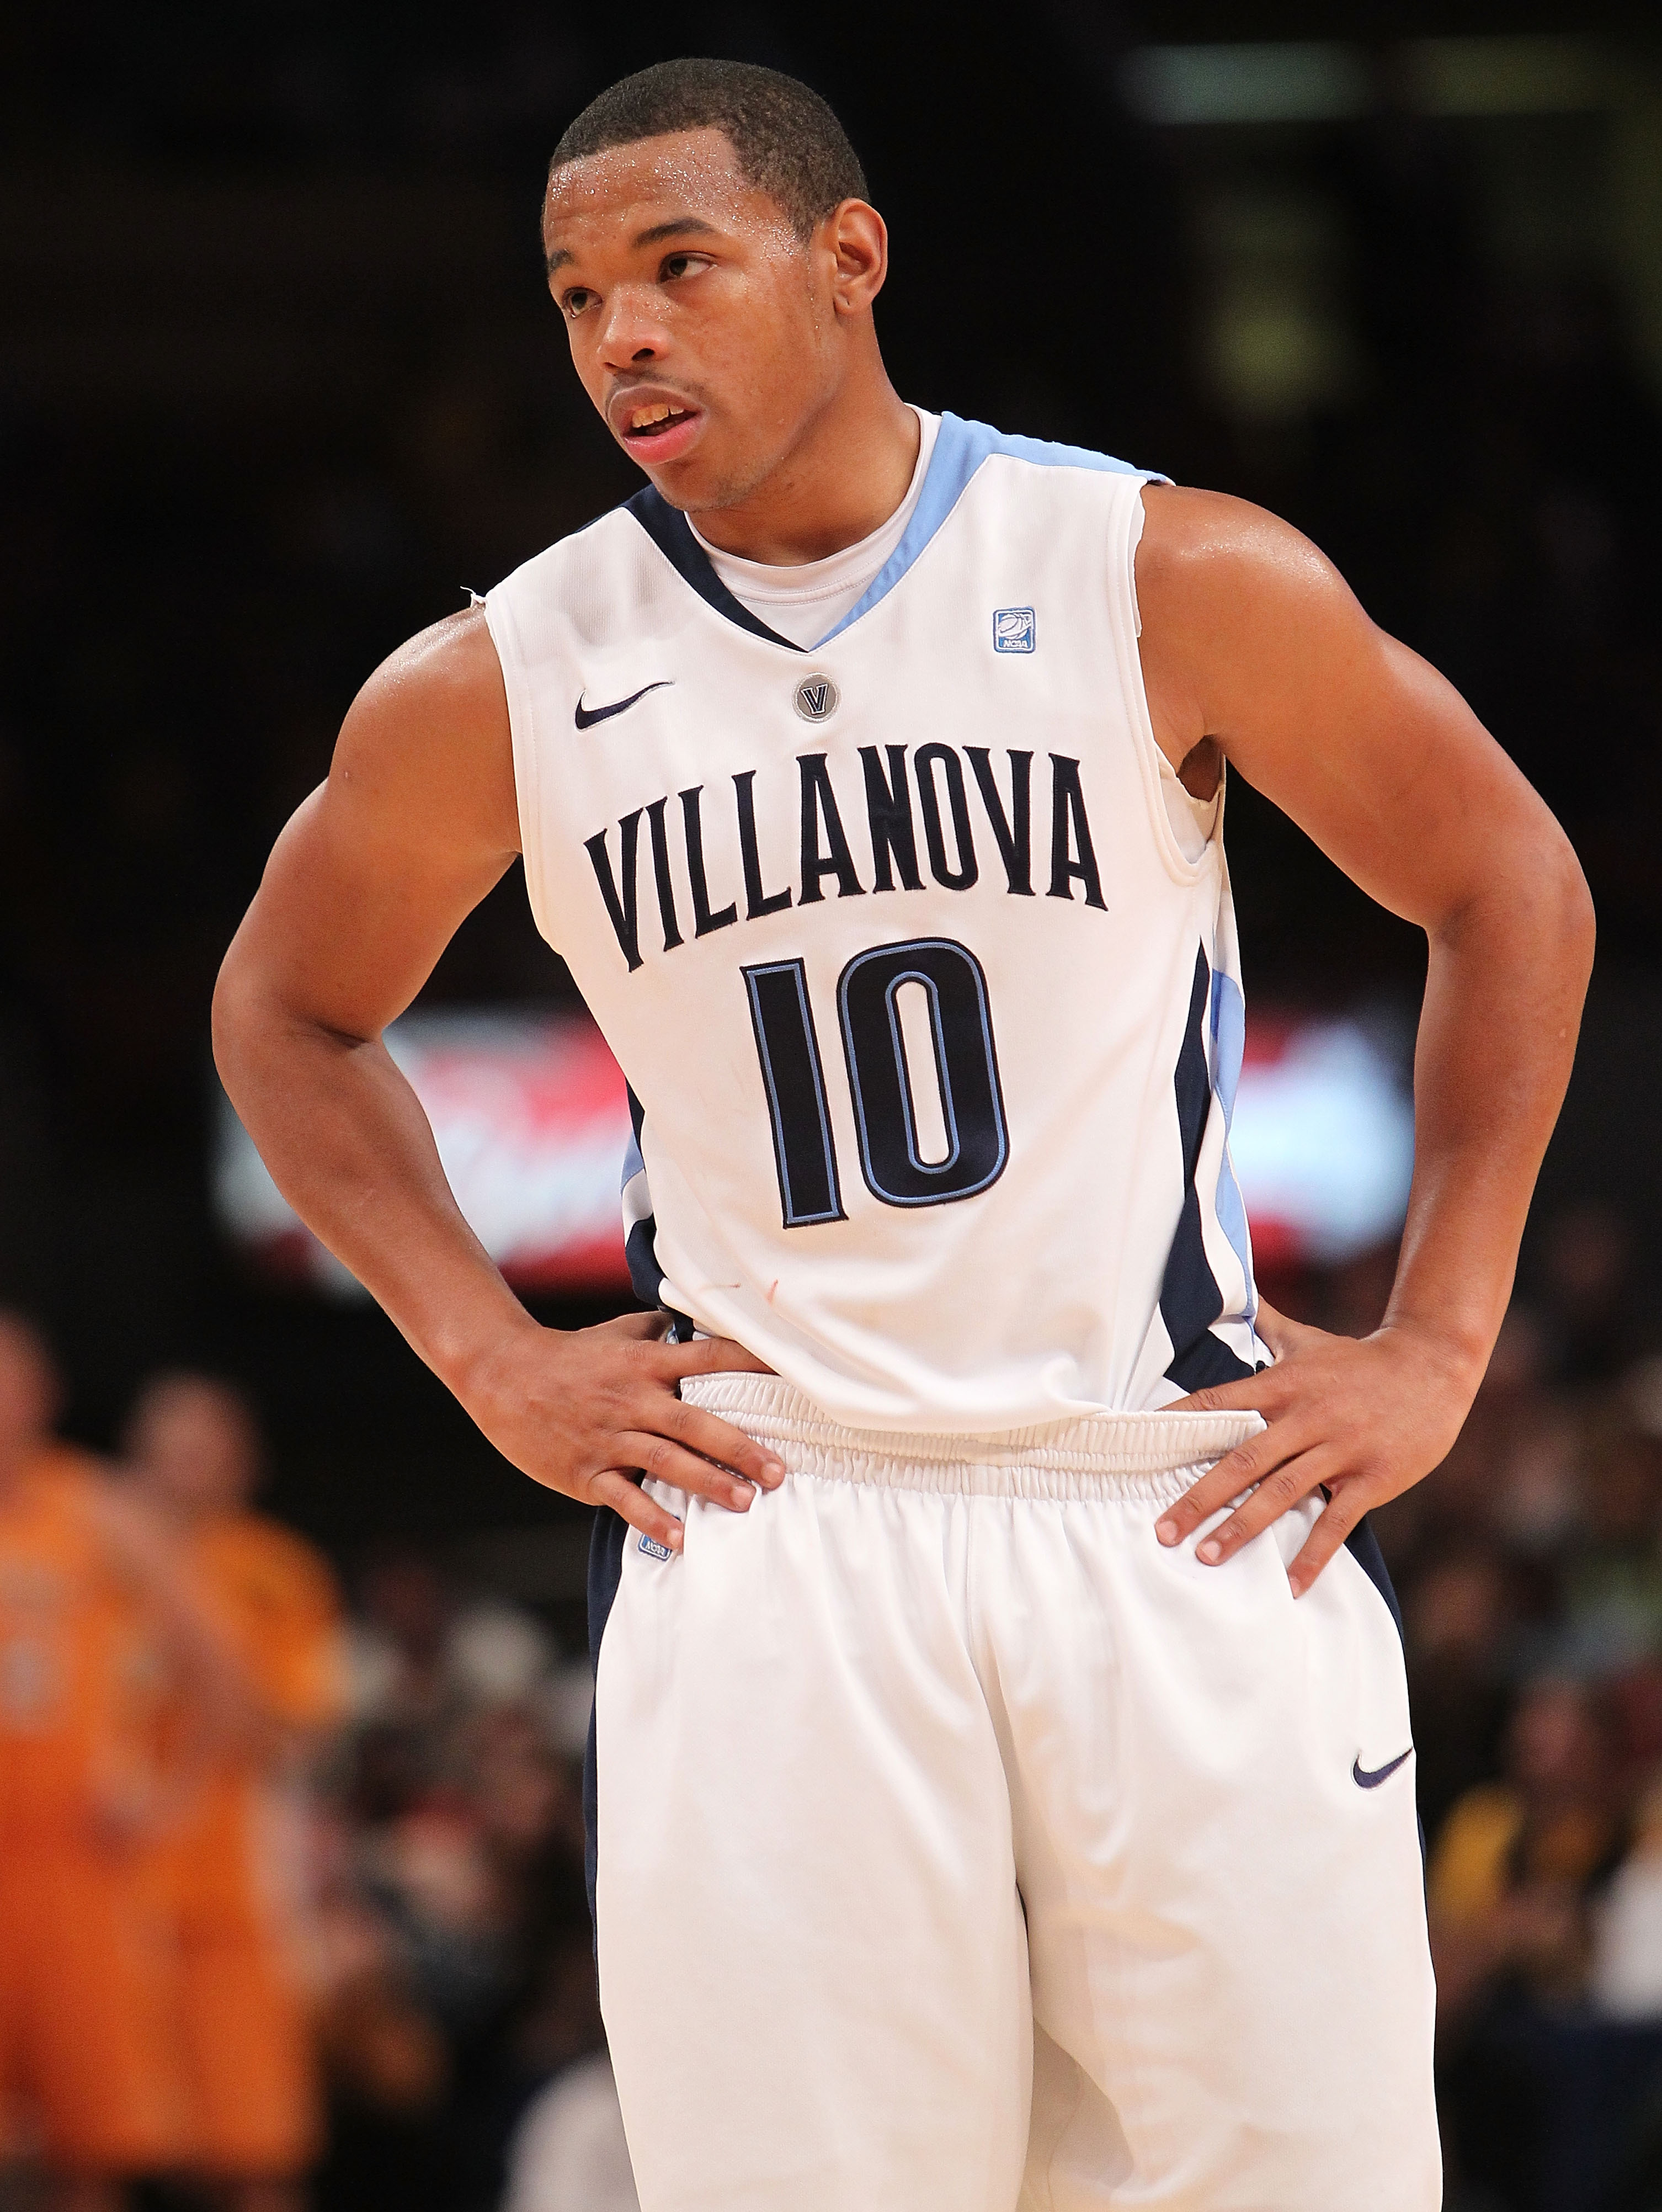 NEW YORK - NOVEMBER 26:  Corey Fisher #10 of the Villanova Wildcats looks on against the Tennessee Volunteers during the Championship game at Madison Square Garden on November 26, 2010 in New York City.  (Photo by Nick Laham/Getty Images)